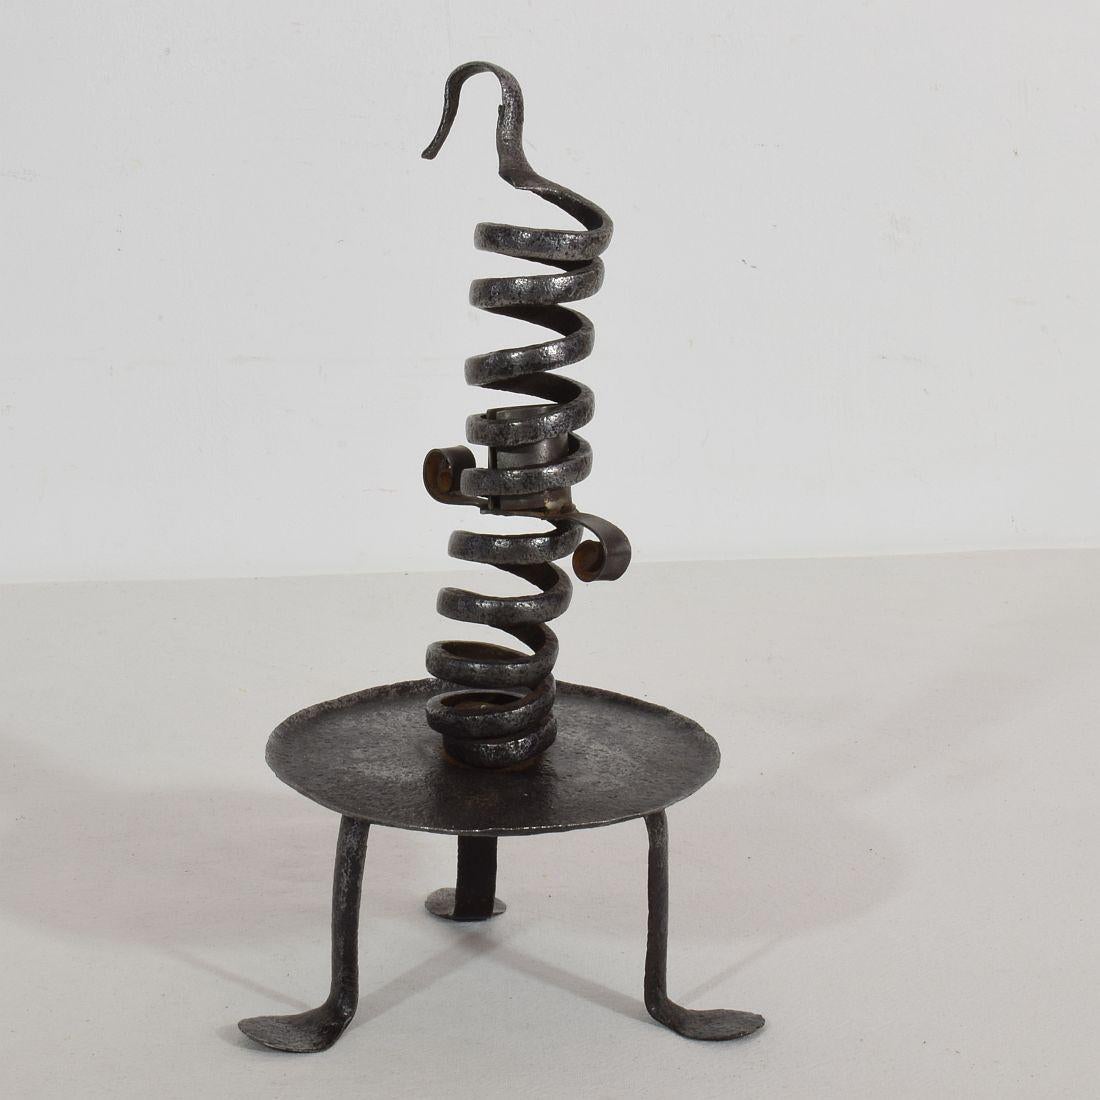 Forged Primitive French 18th Century Rat De Cave Candleholder